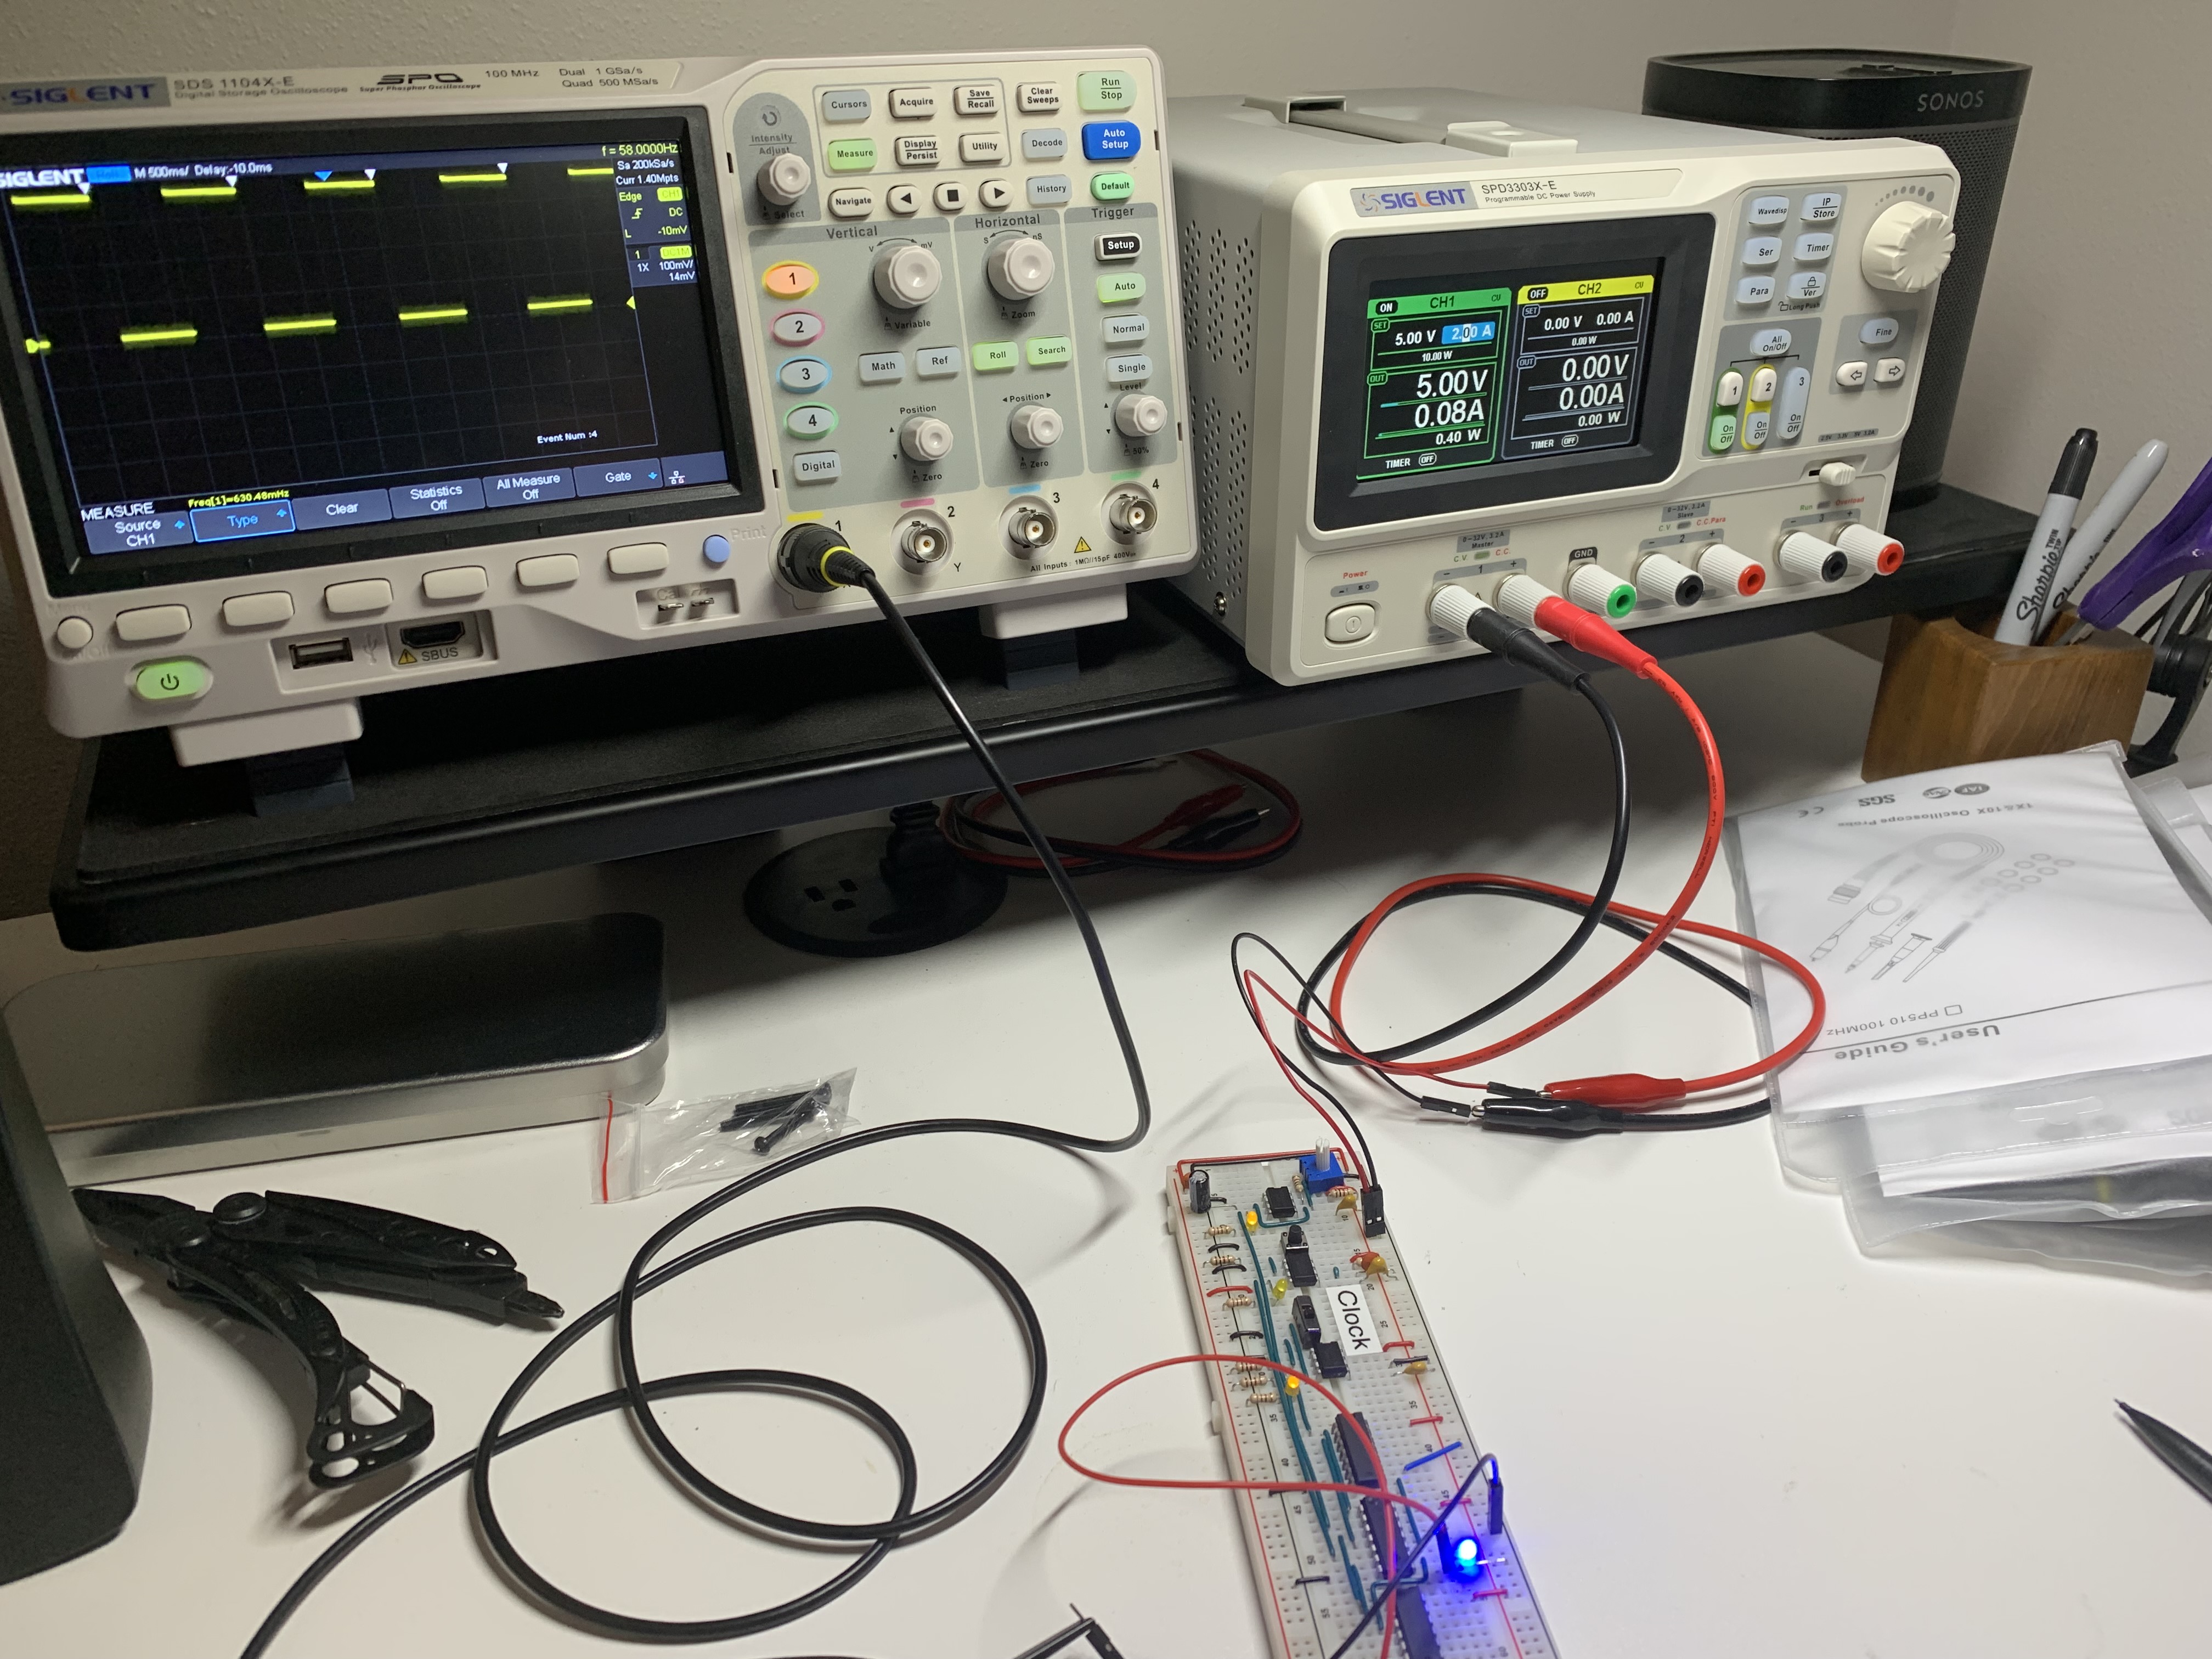 An image of an oscilloscope and bench power supply on a desk connected to a breadboard, showing the clock frequency on the oscilloscope.